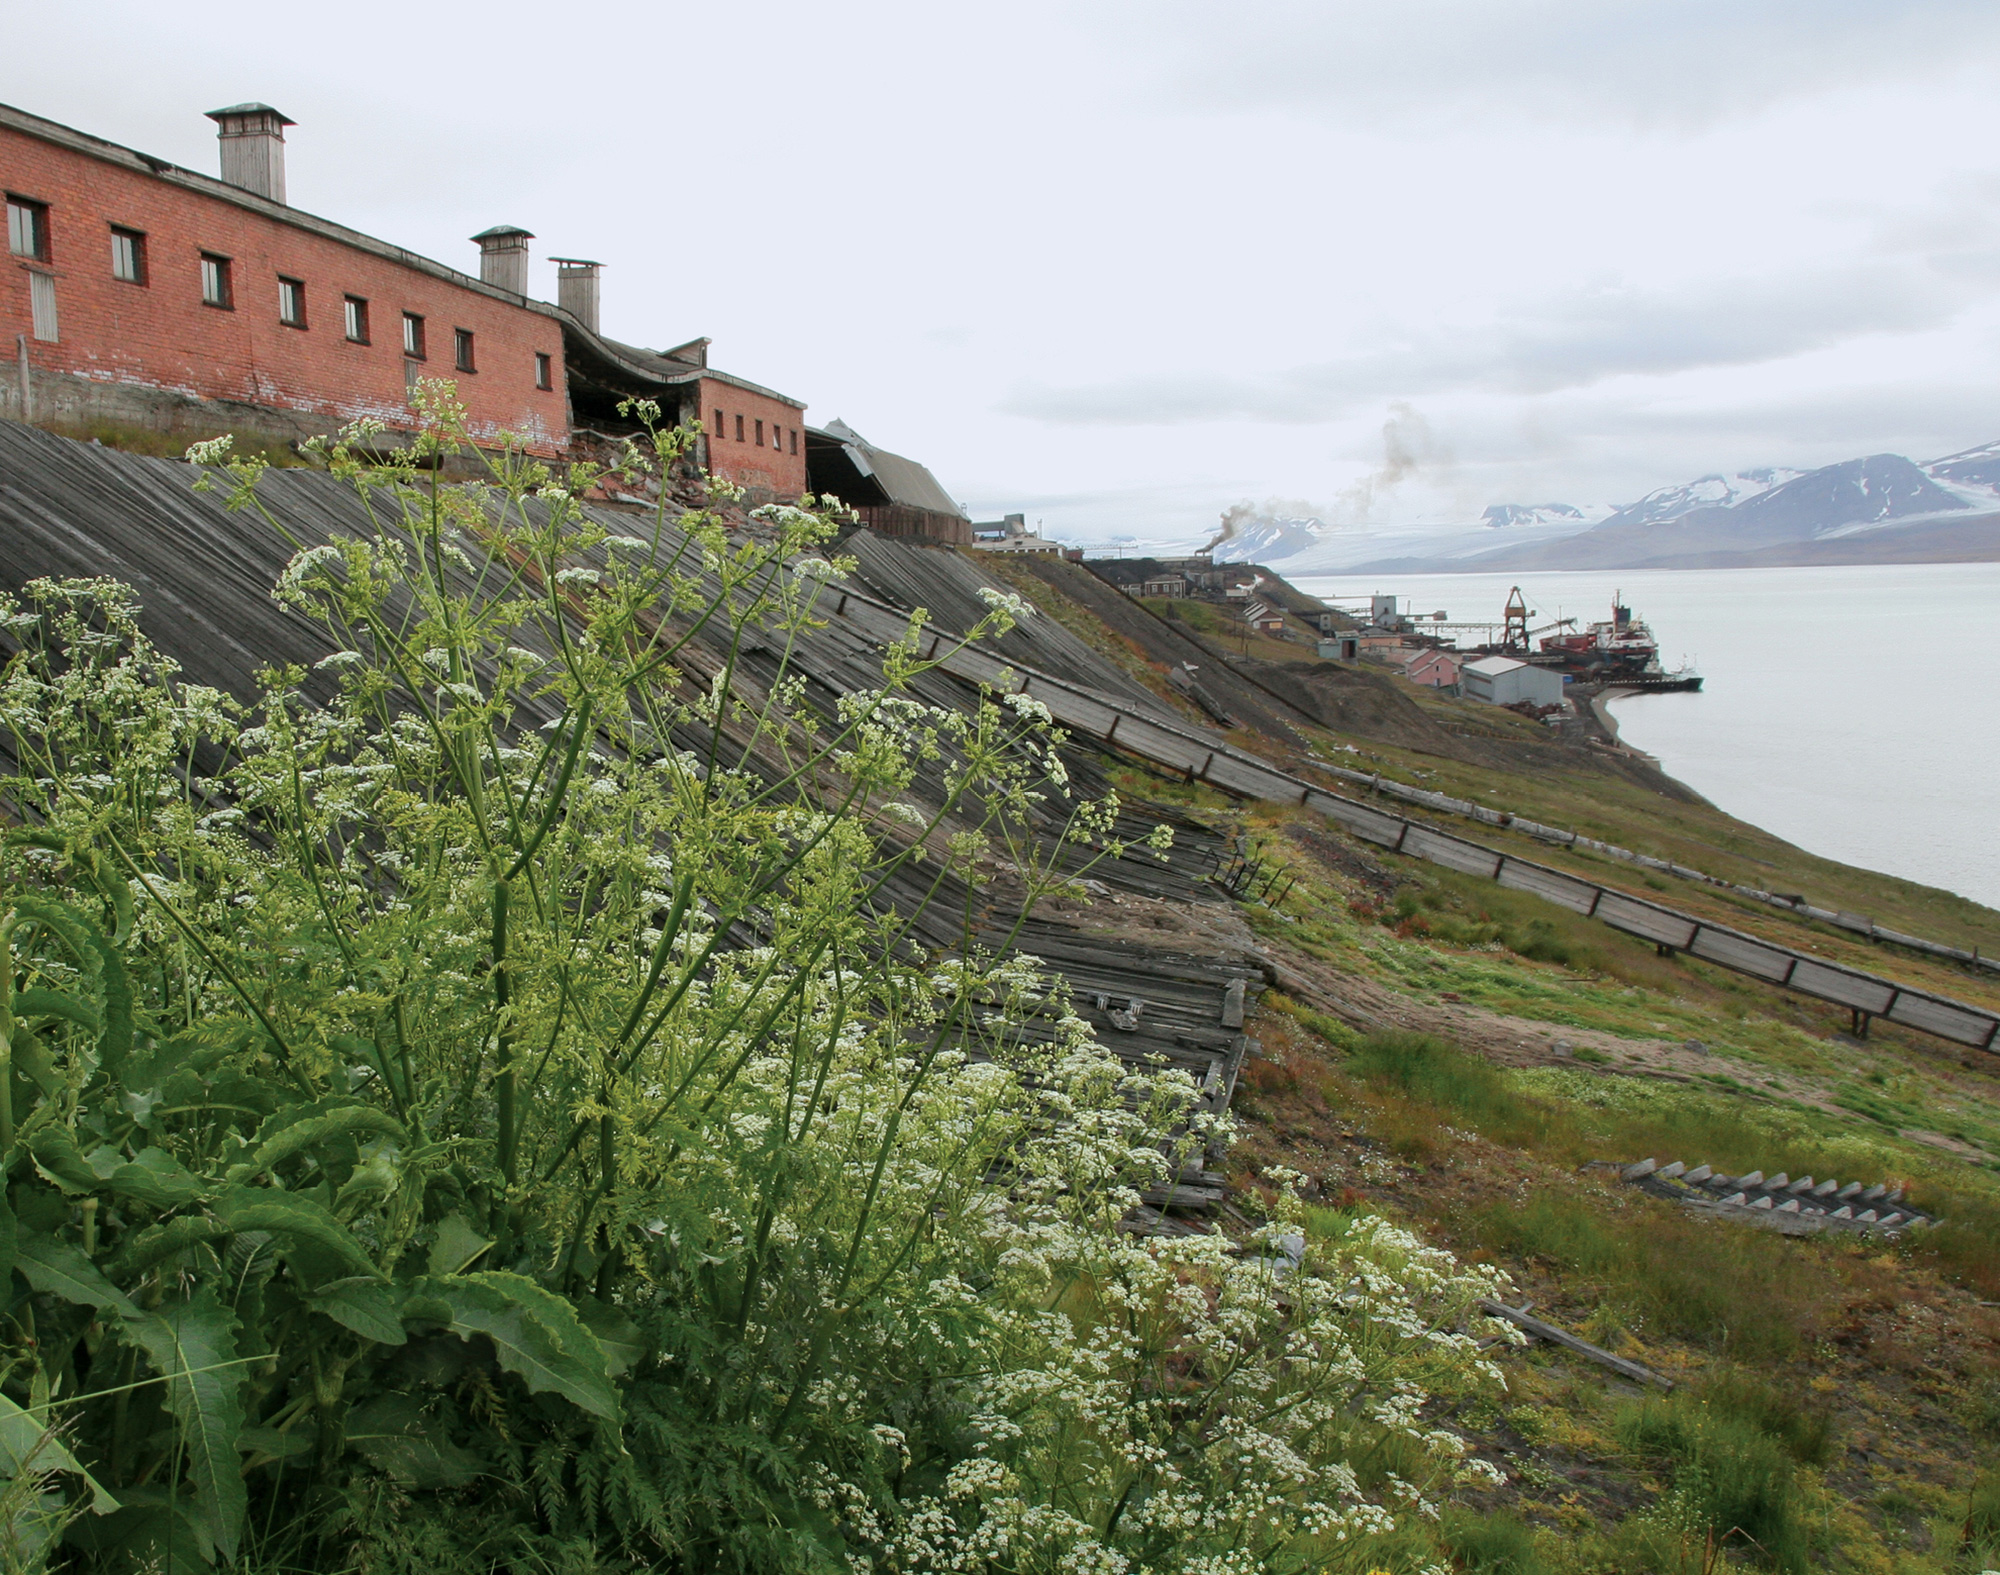 A selection of the thirty-odd plants growing on Svalbard today. All photos Inger Greve Alsos.